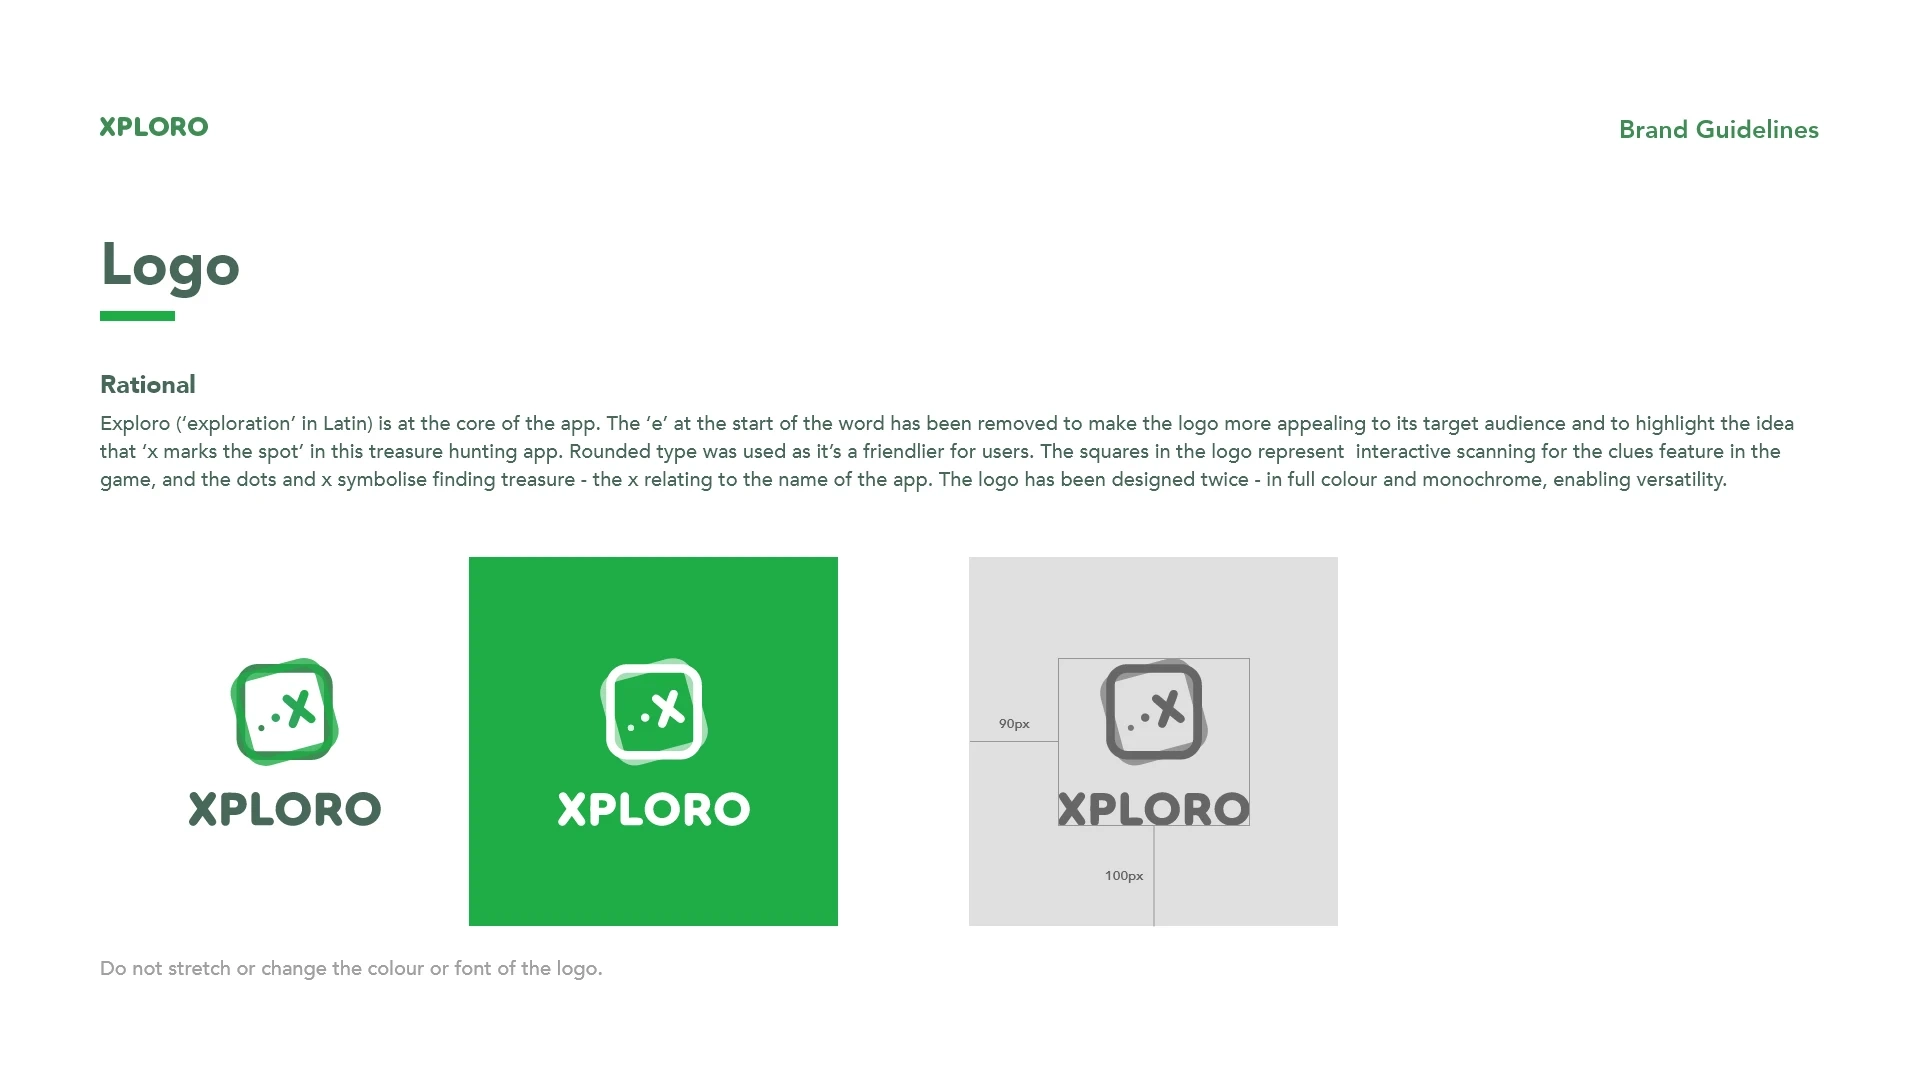 The third page of the Xploro brand guidelines outlines the various versions of the logo available